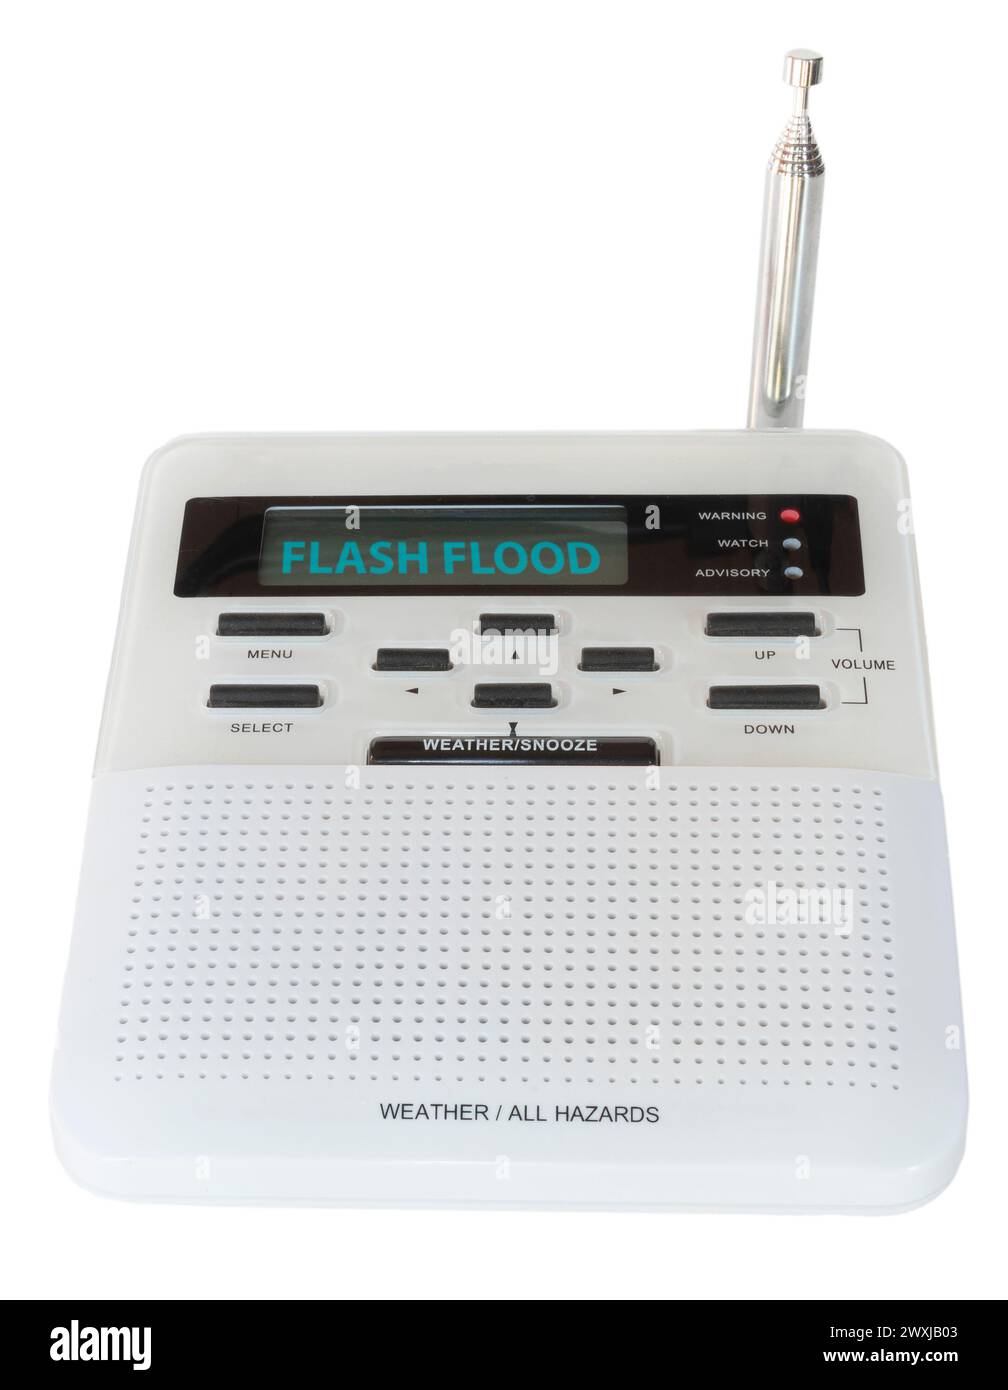 Hazard and weather radio that has sounded an audible alarm and is showing a flash flood warning issued by the government for the region. Stock Photo